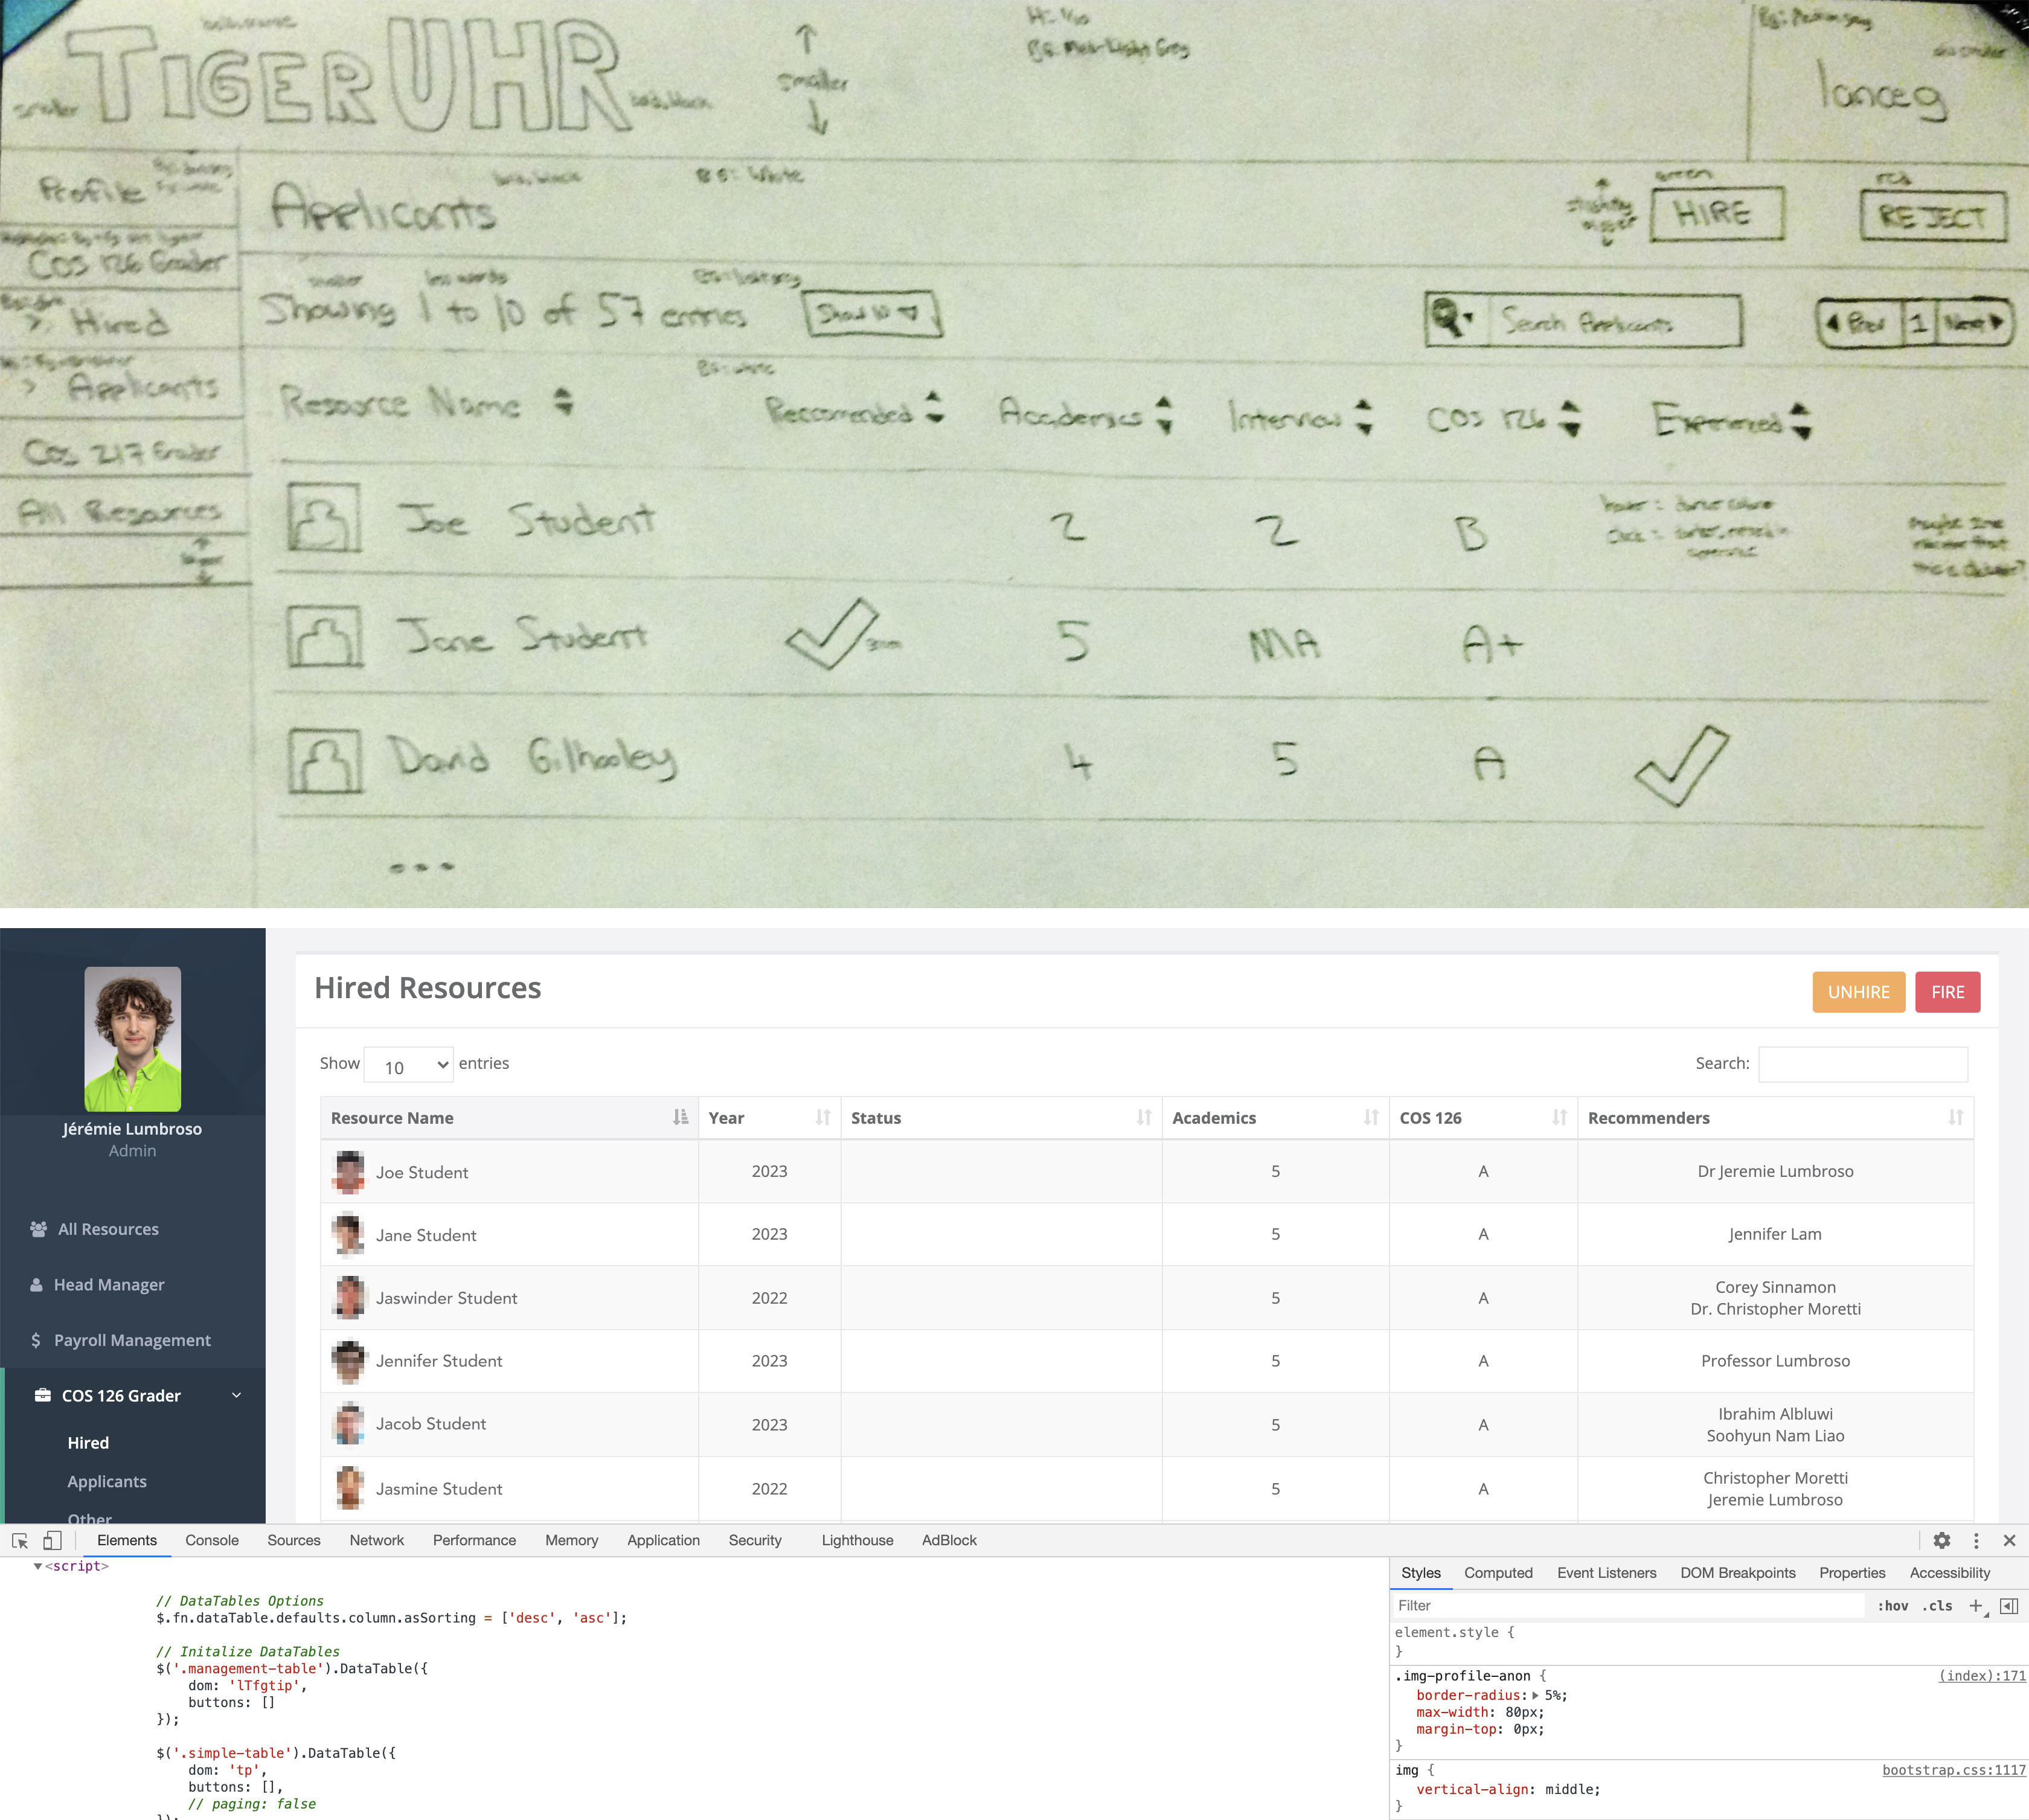 Two images stacked on top of each other.  Top image is a photo of a hand drawn draft by Lance Goodridge of the TigerUHR site layout.  Bottom image is a screen shot of the actual TigerUHR website from the view of an admin.